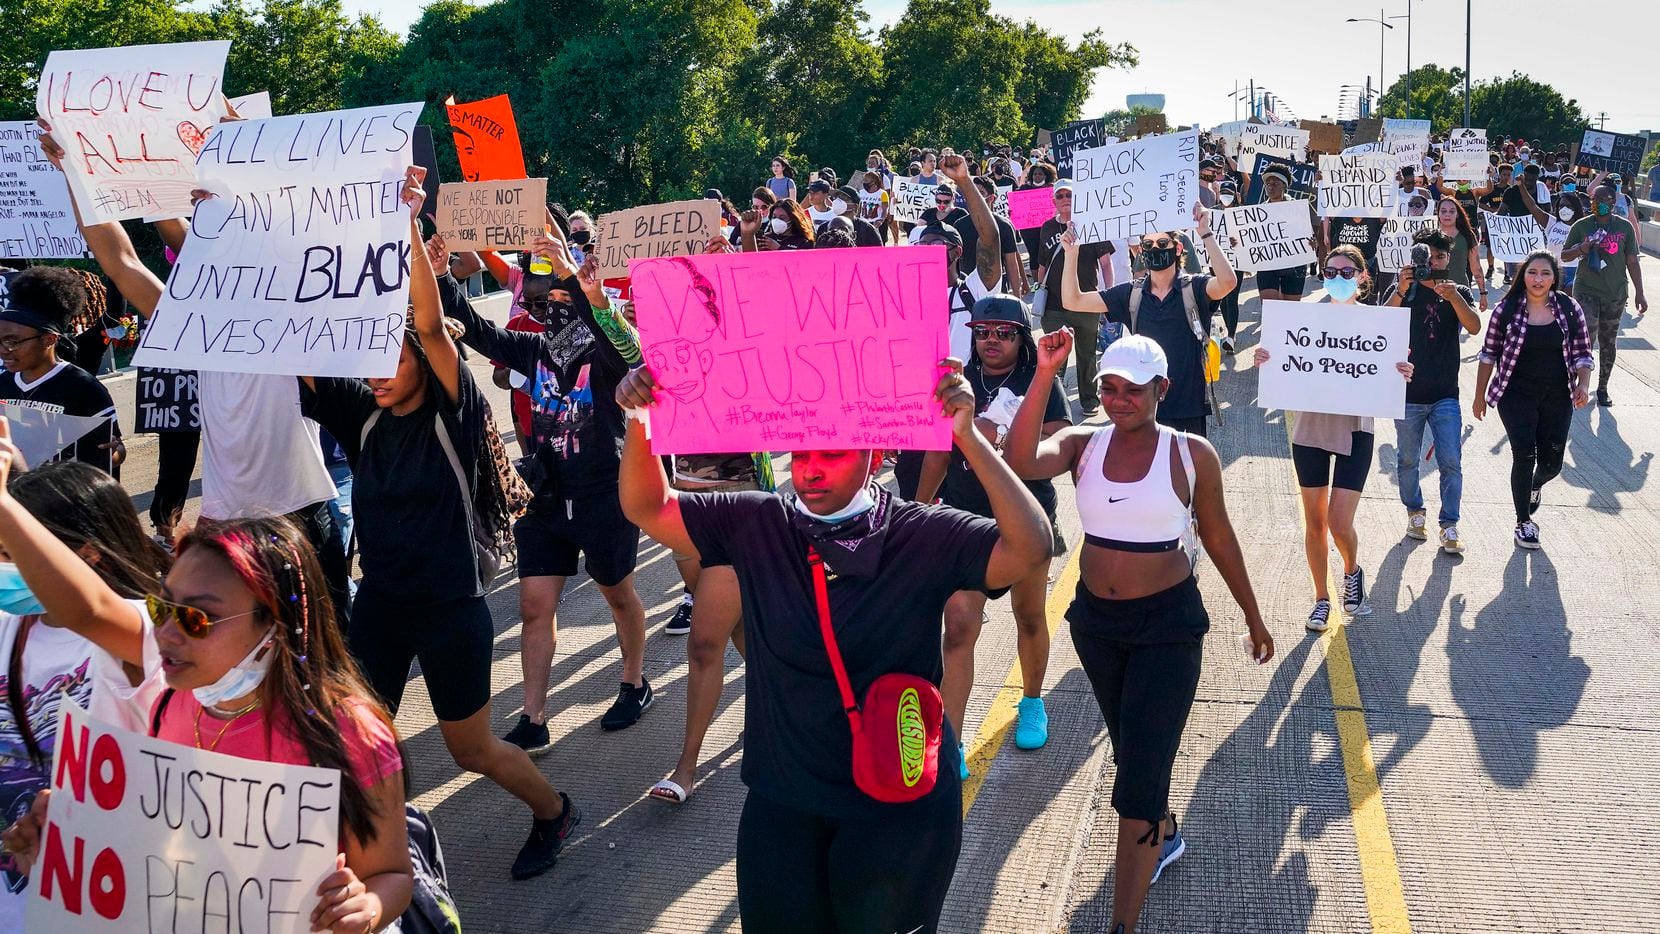 Demonstrators march on the Arapaho Road bridge crossing Midway Road during a protest on Thursday, June 4, 2020, in Addison. Protests continued Thursday in the response to the death of George Floyd.